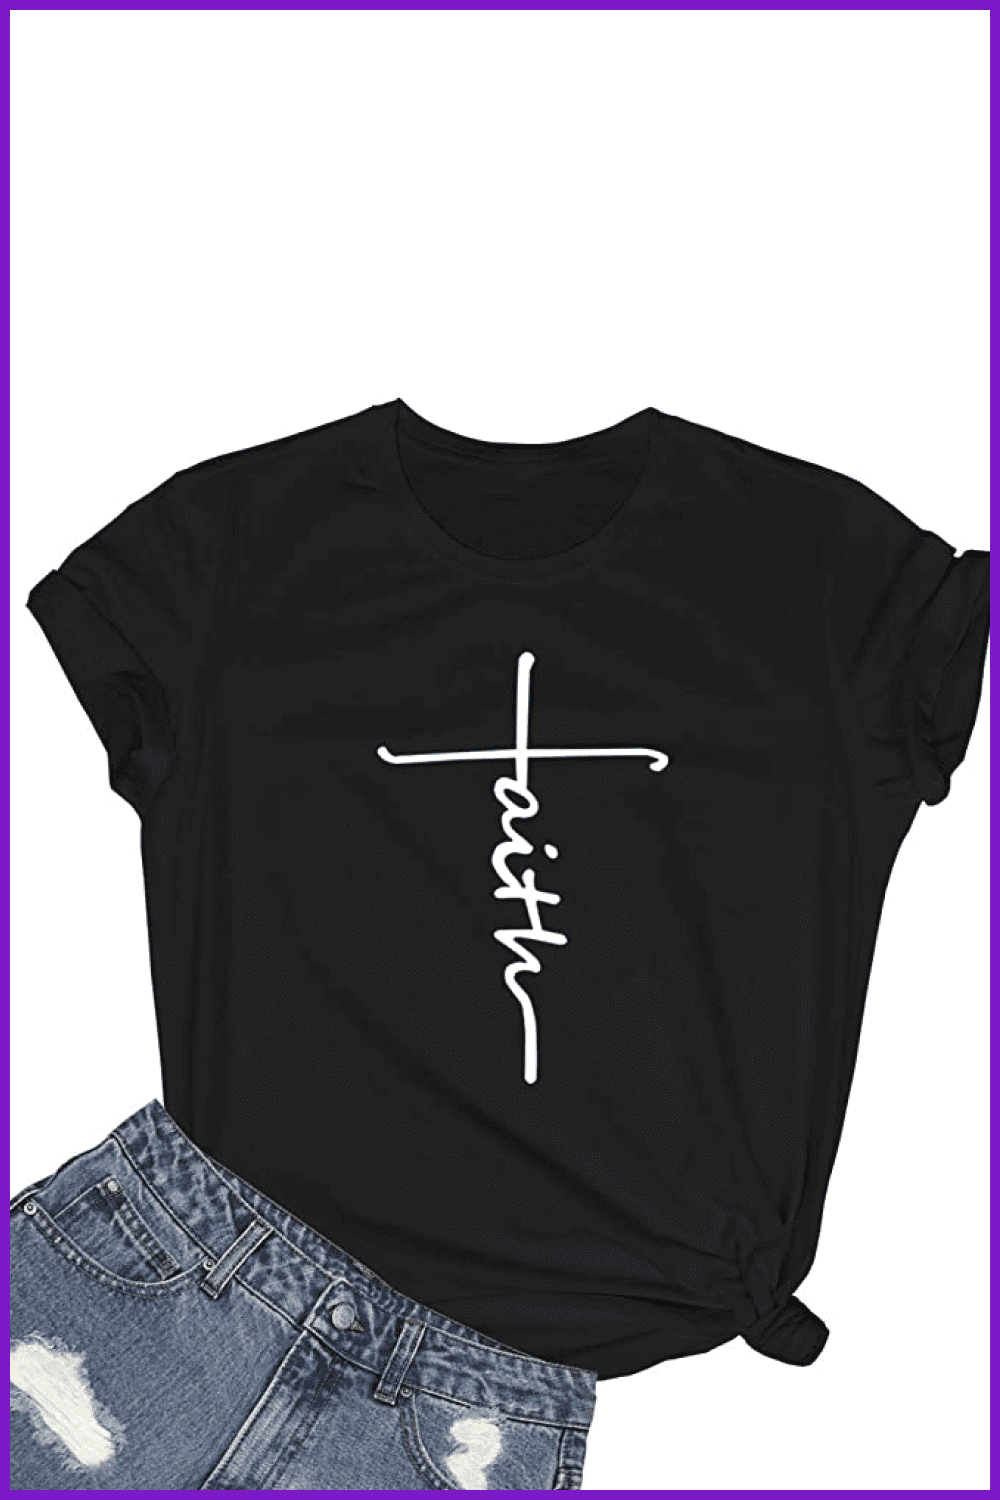 Black T-shirt with a white cross from the word Faith.